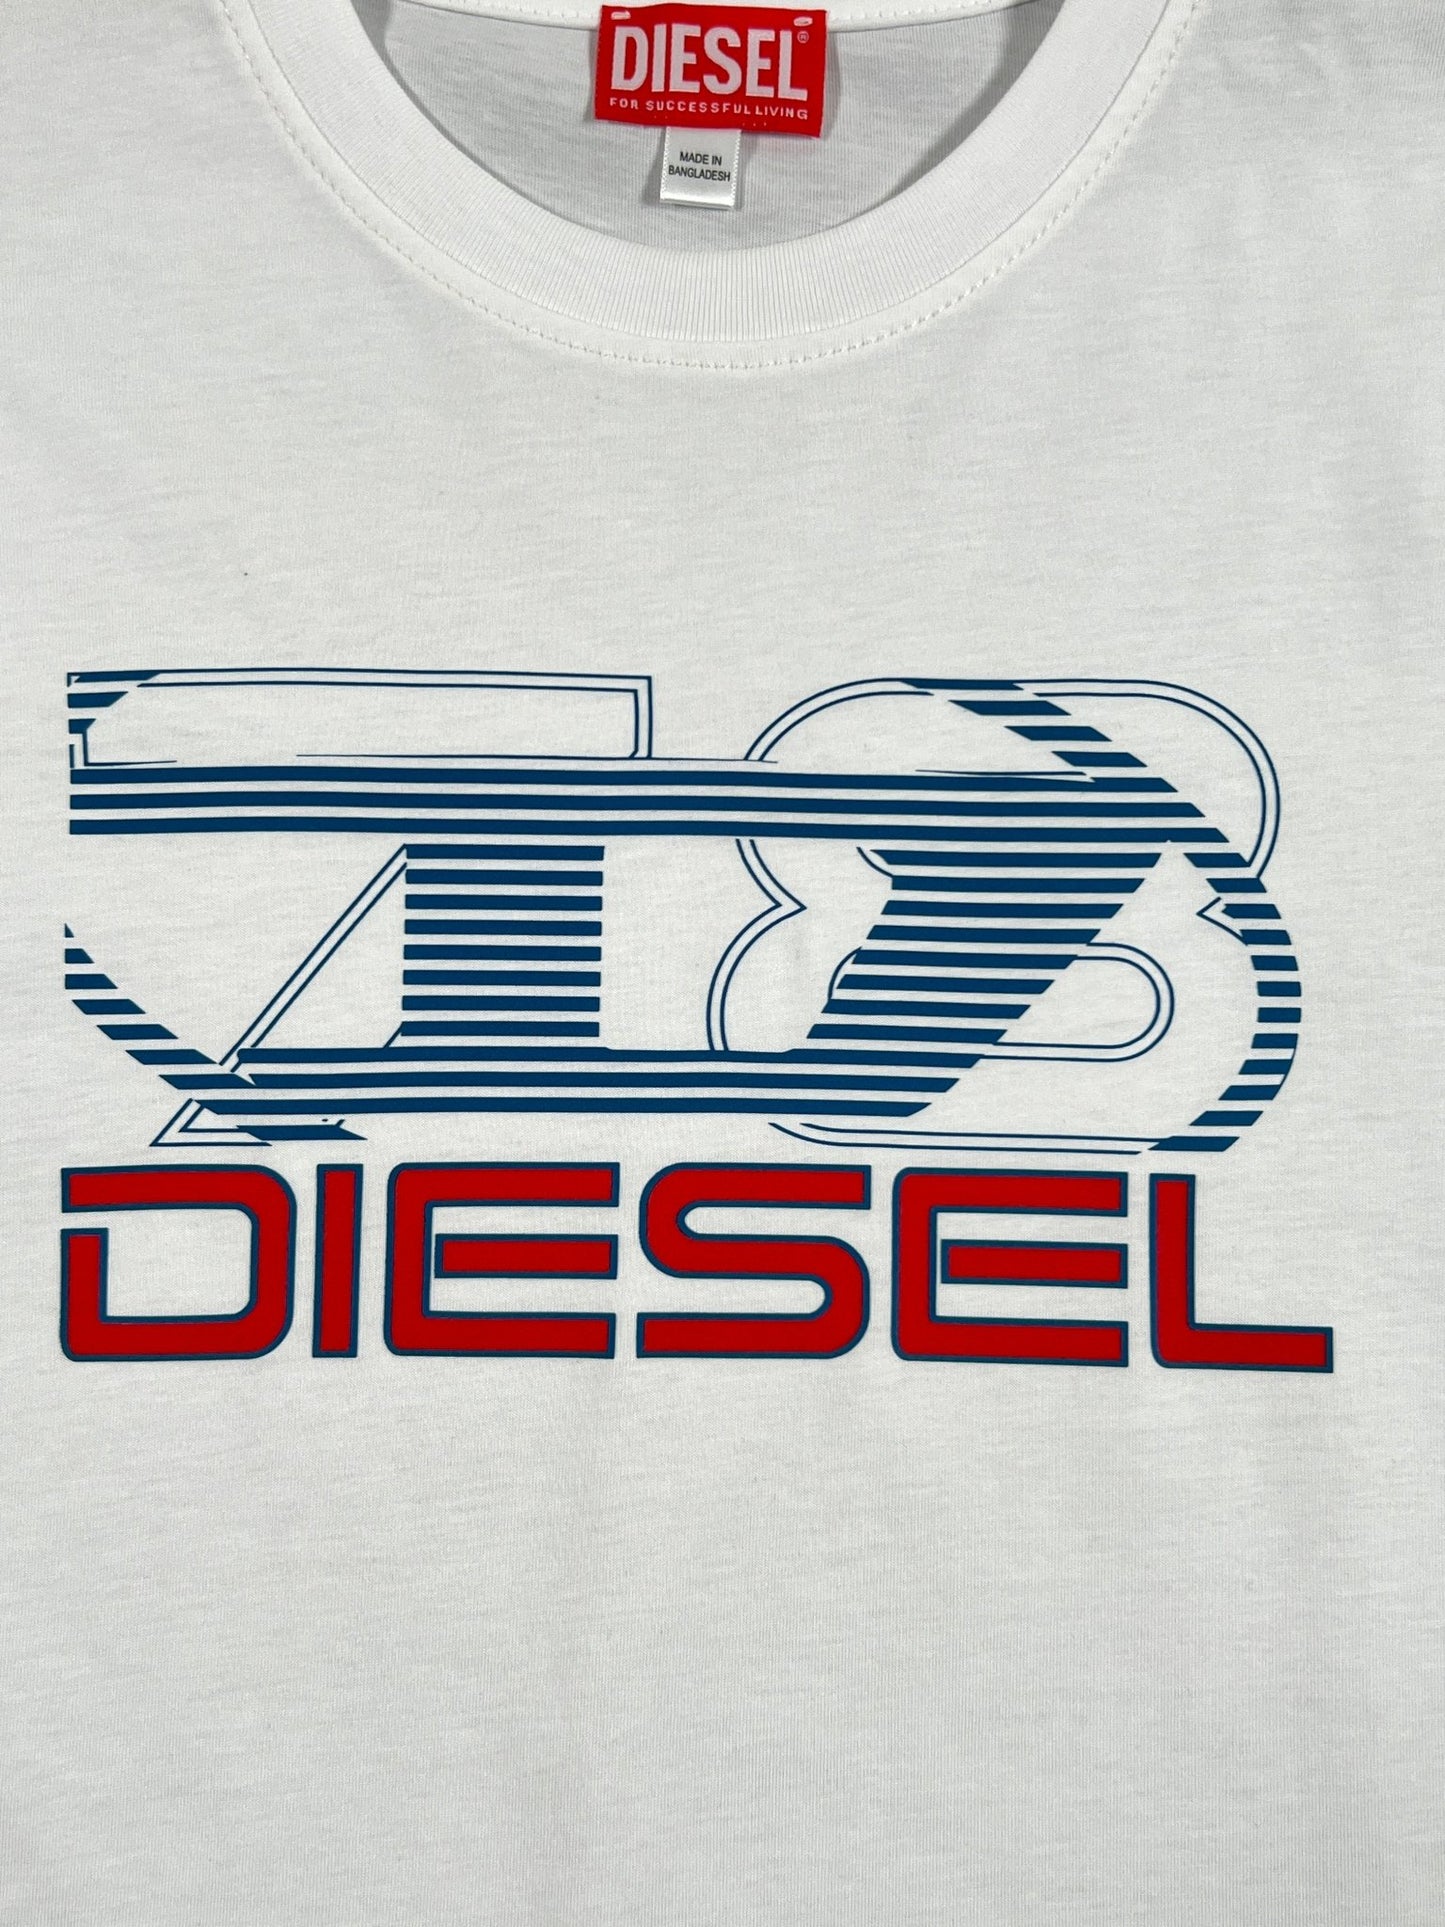 DIESEL DIESEL T-DIEGOR-K74 T-SHIRT WHITE in slim-fit style with blue and red monogram logo graphic.